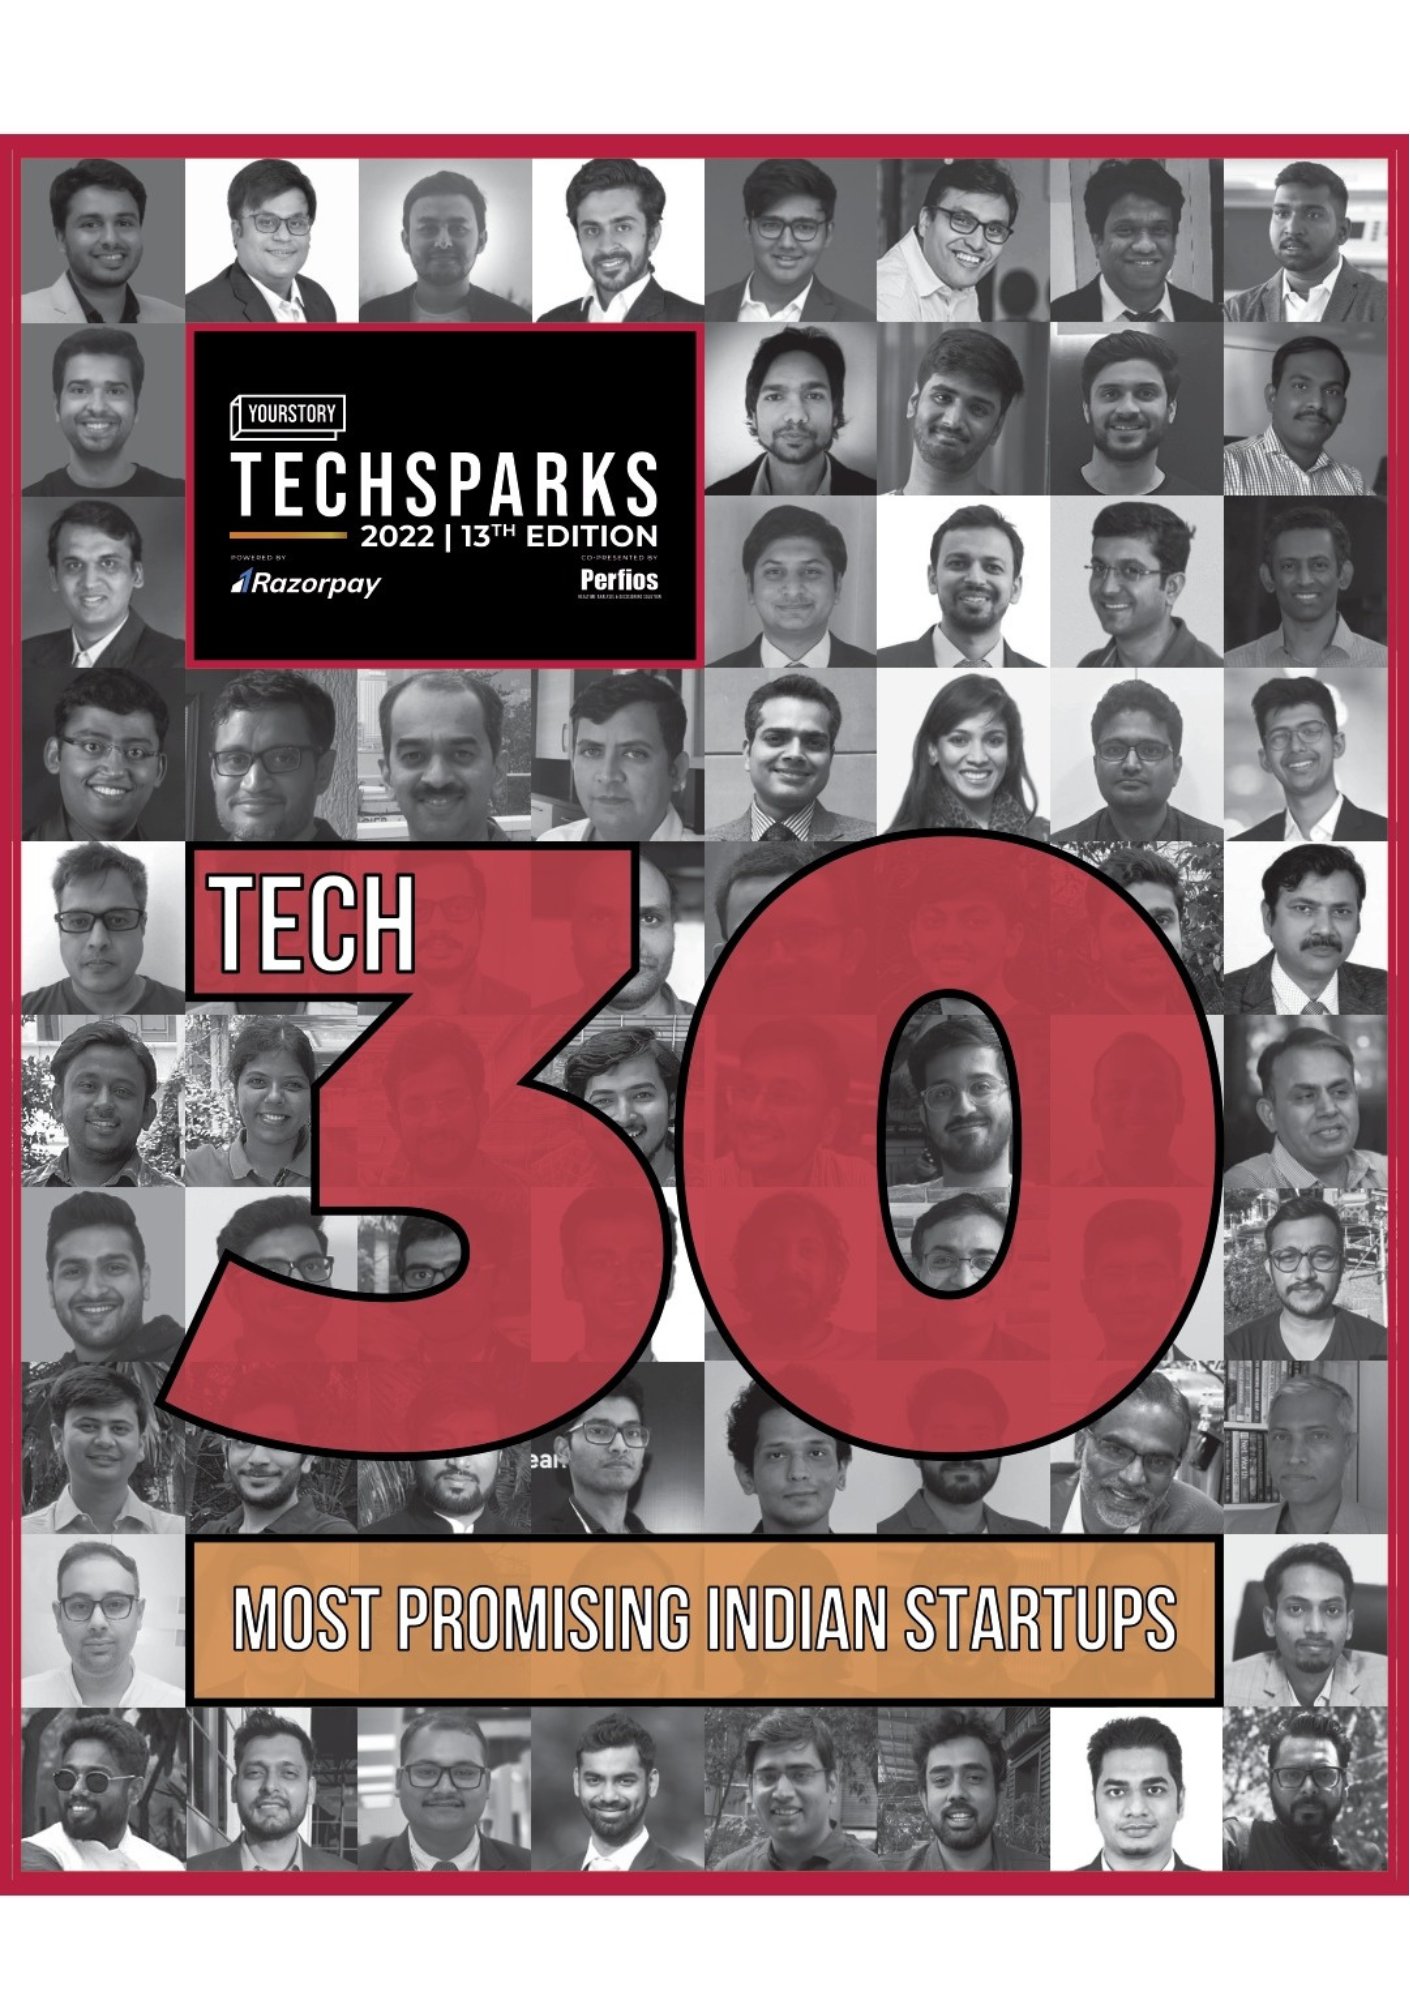 Celebrating YourStory Media Tech 30: India’s Most Promising Startups 2022 Cohort